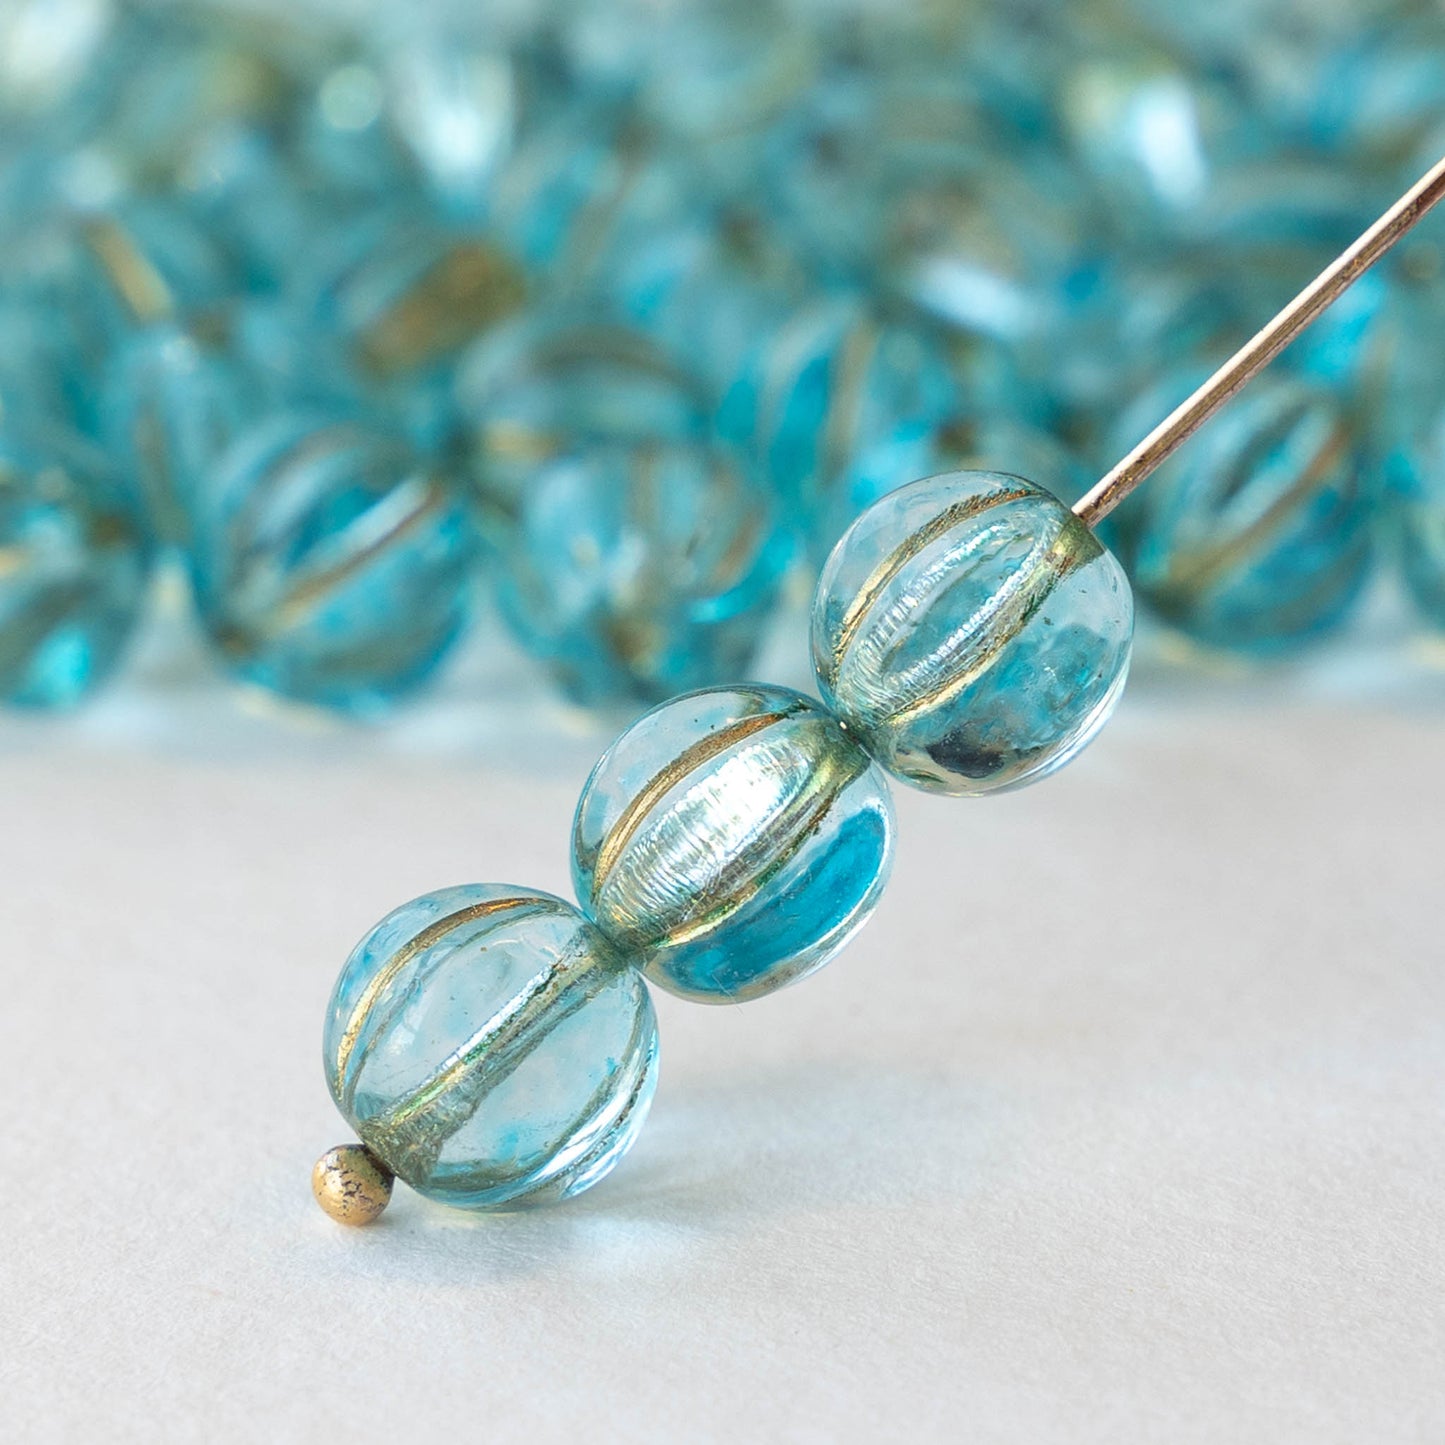 8mm Melon Bead - Seafoam with Gold - 25 Beads